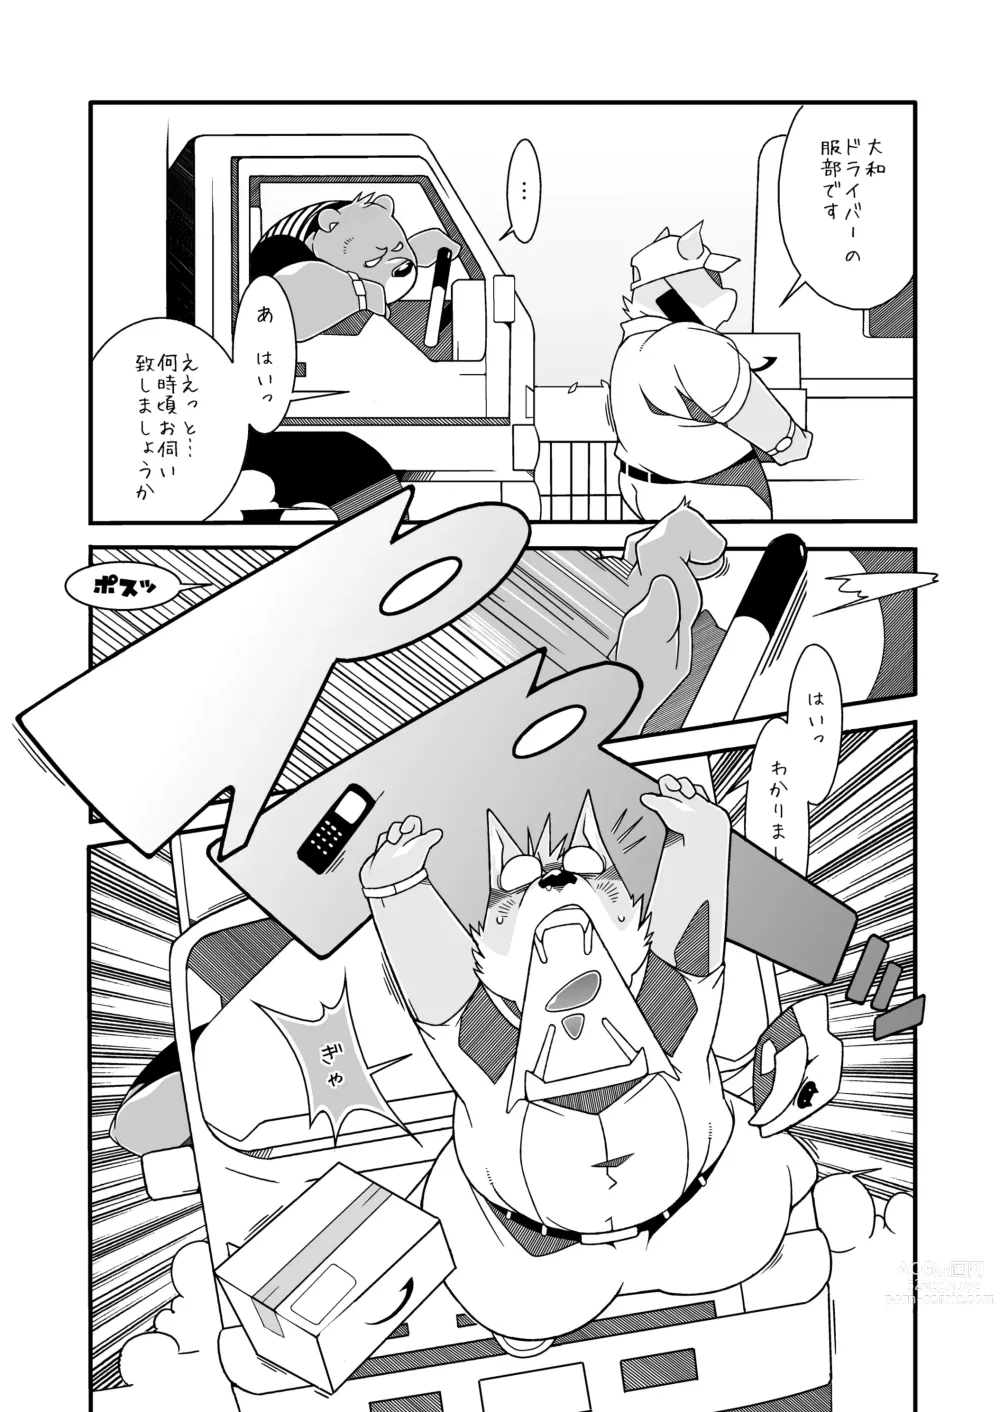 Page 7 of doujinshi Yeah, that's right.